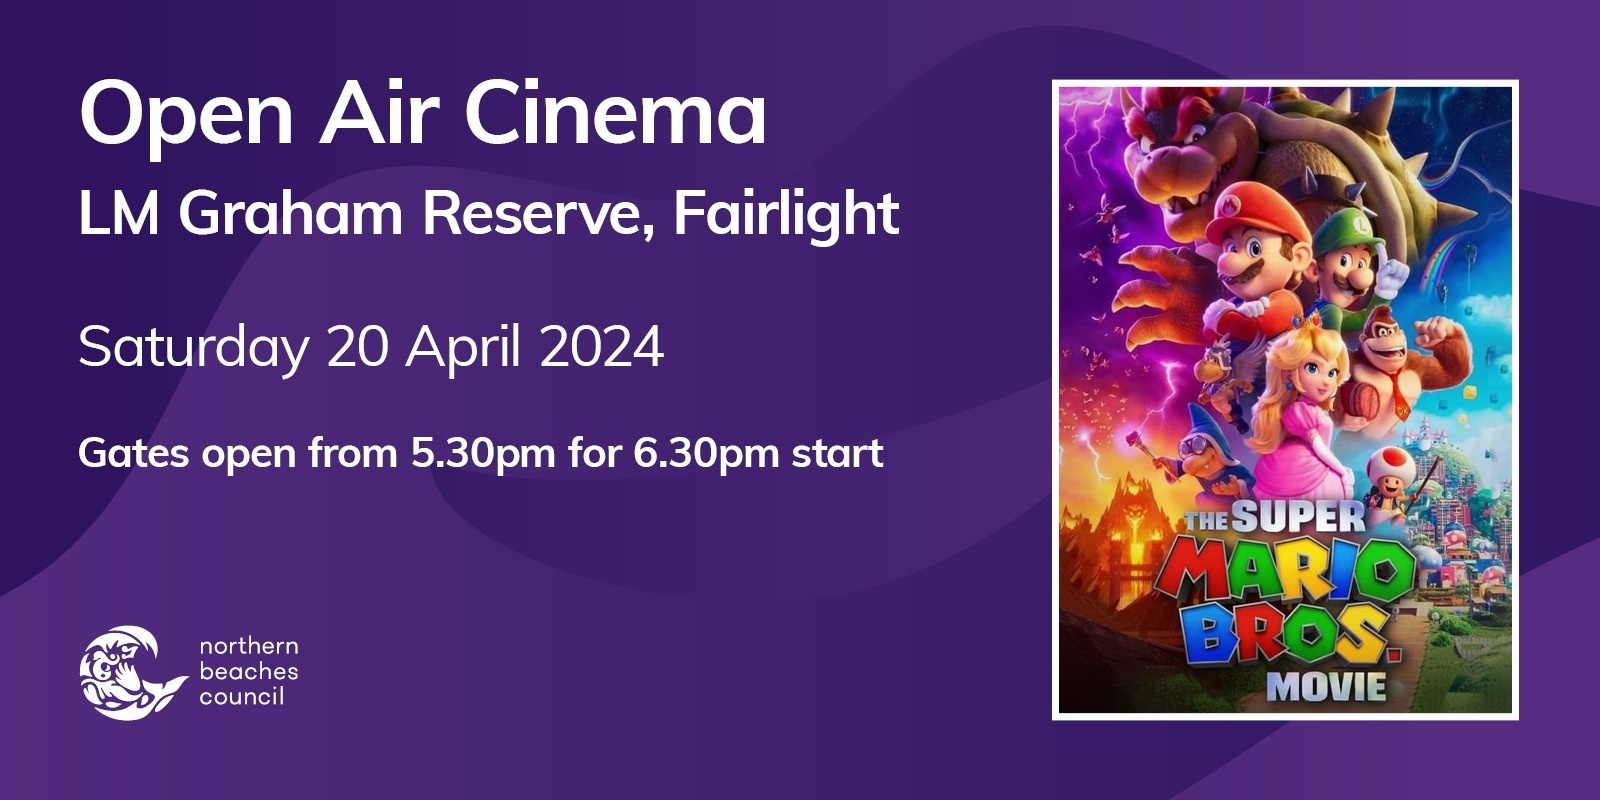 Banner image for CANCELLED - Open Air Cinema, Fairlight - Saturday 20 April 2024 - The Super Mario Bros. Movie